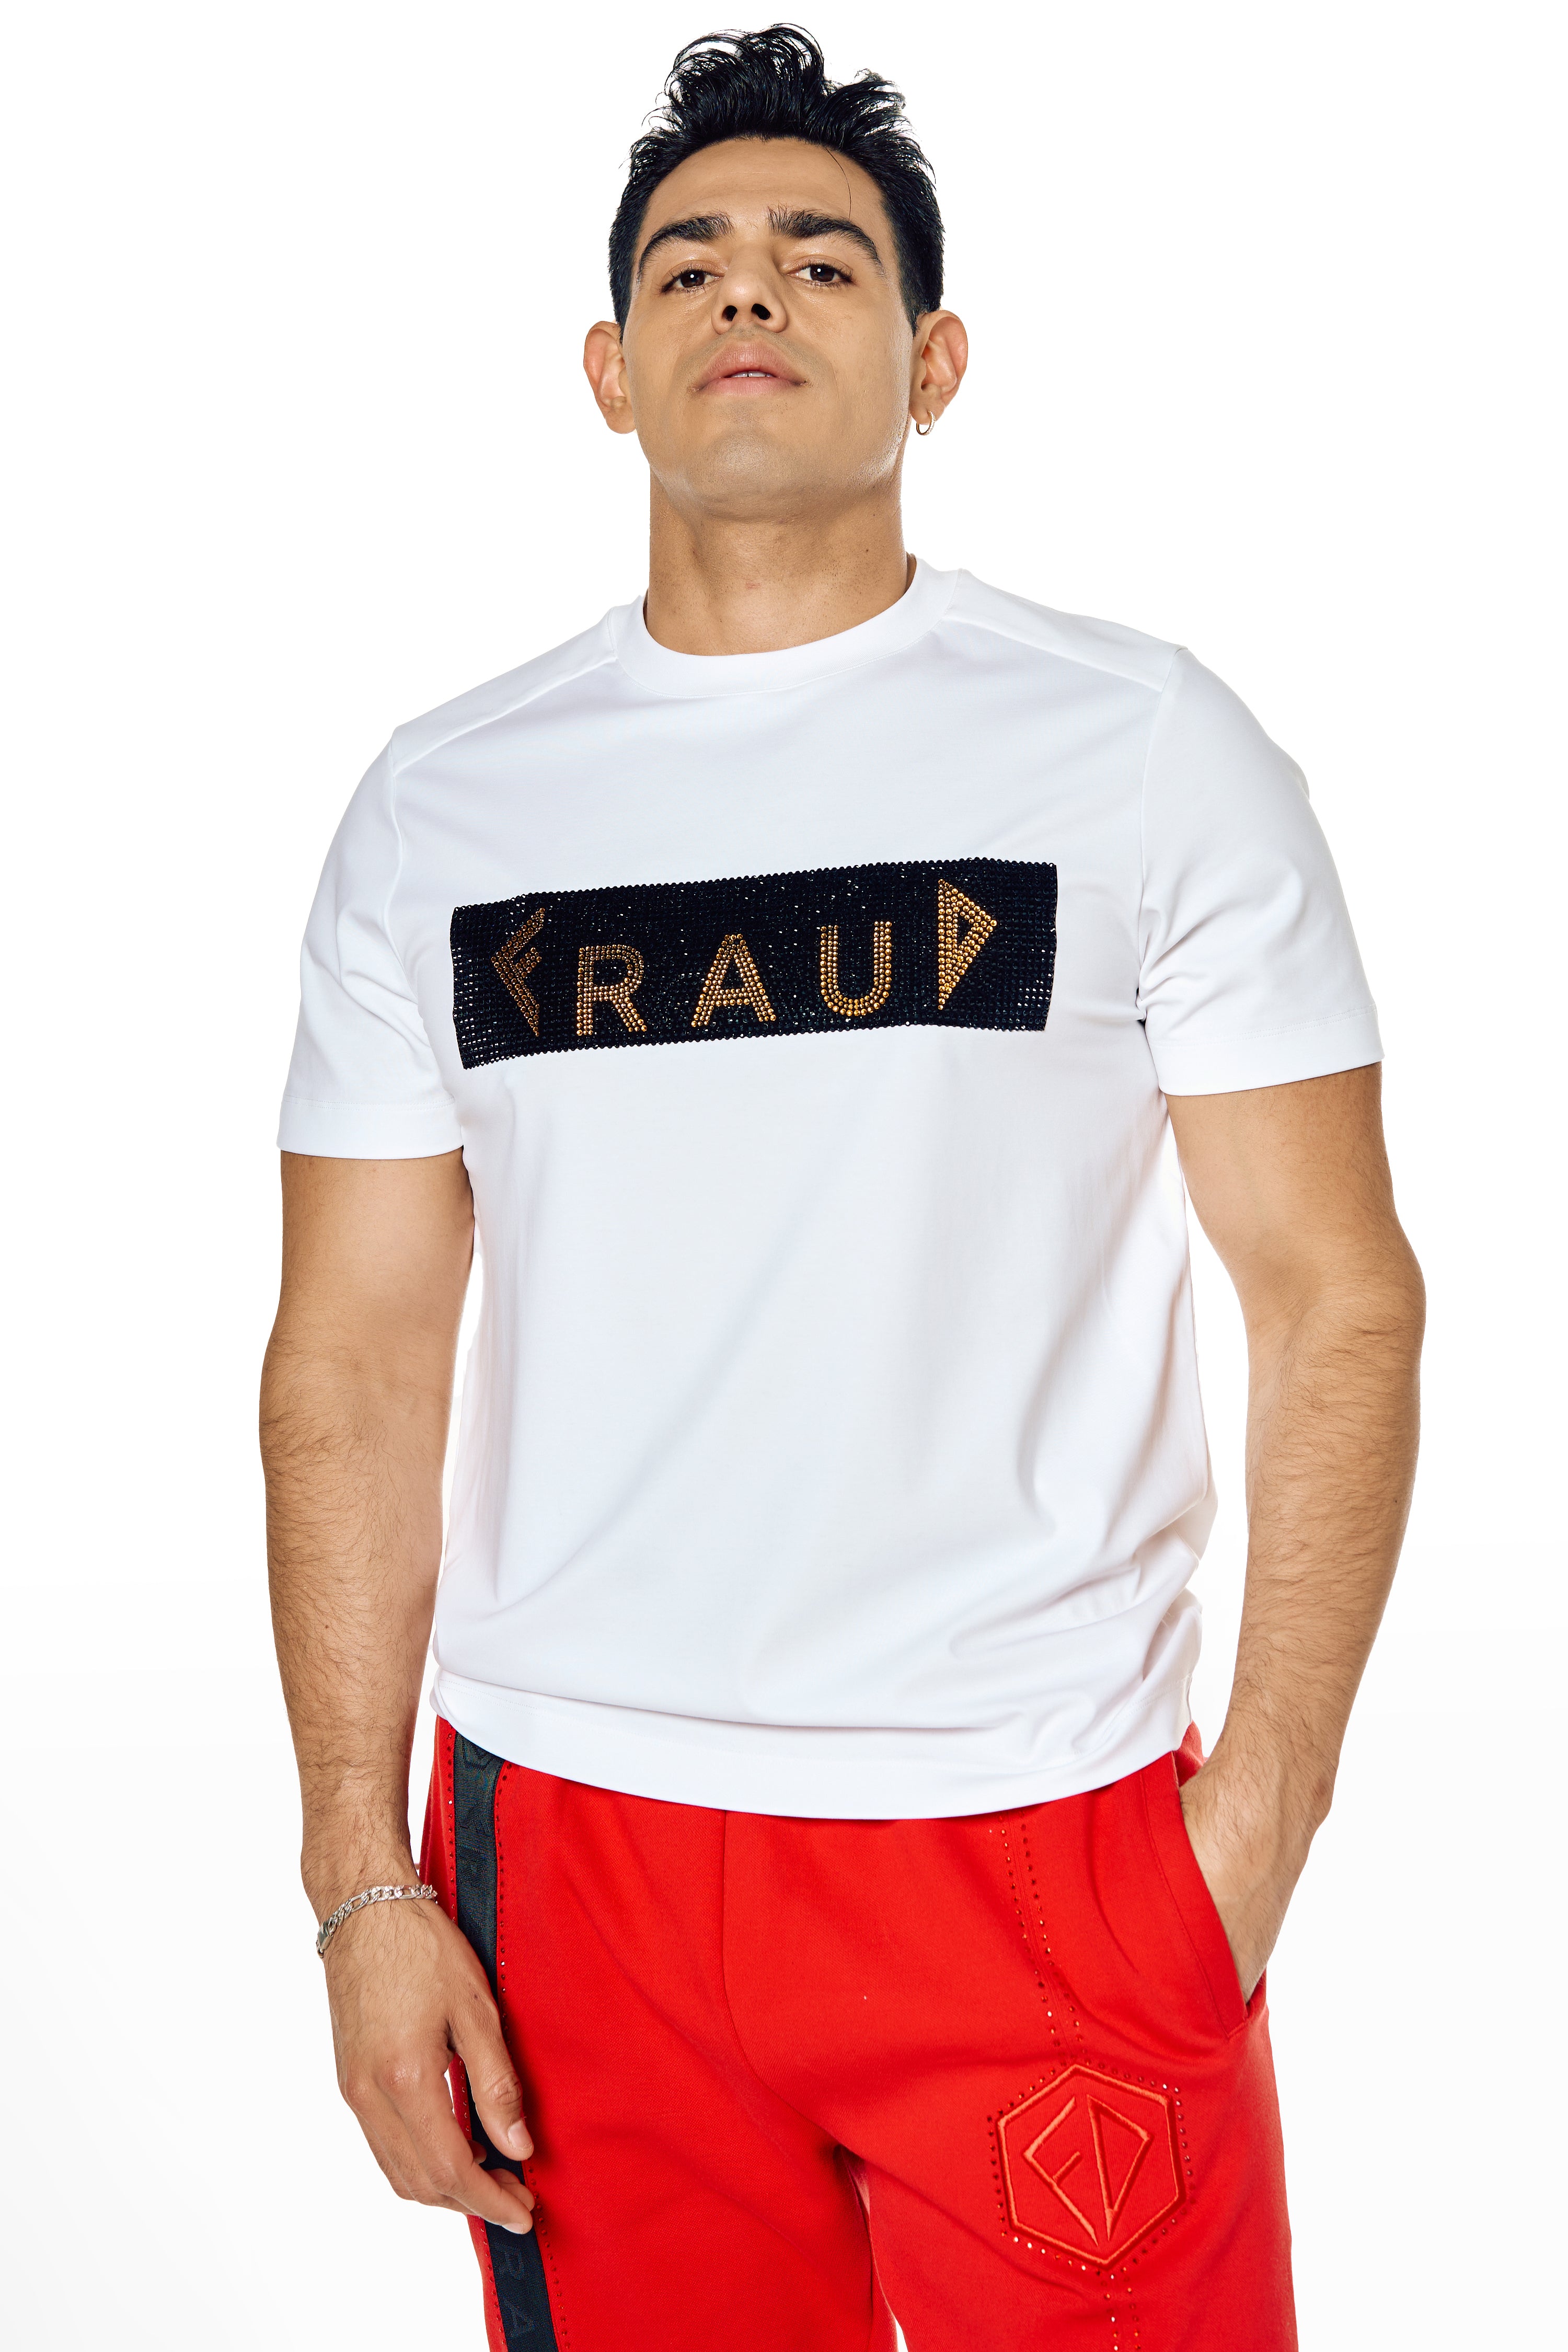 White t-shirt with crystal logos